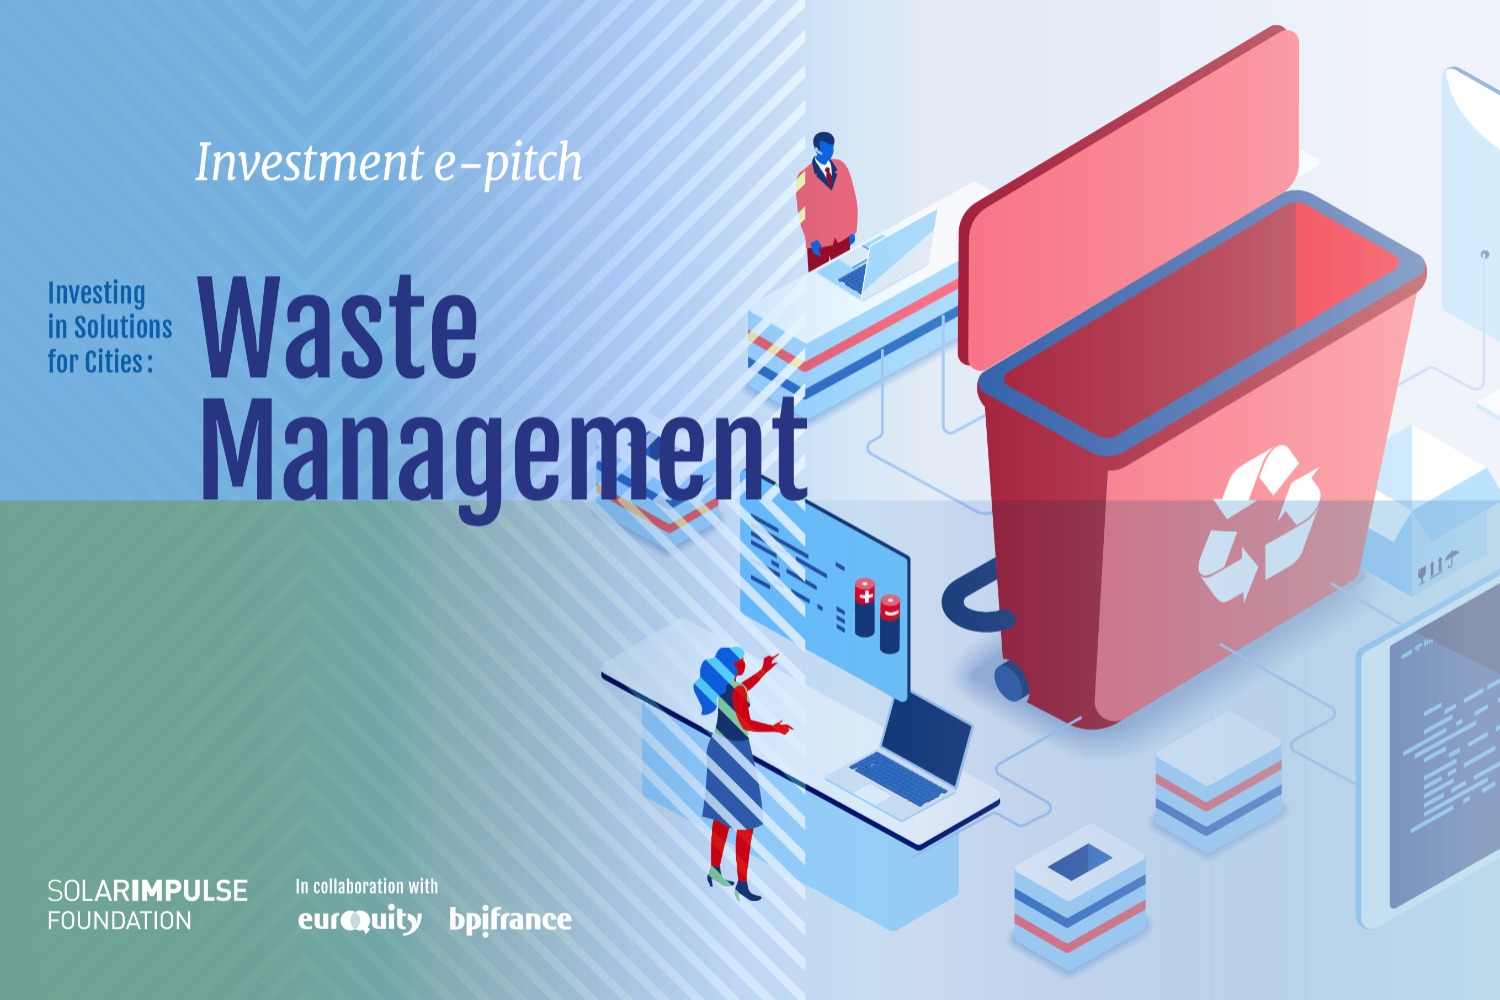 Investing in Solutions for Cities: Waste Management